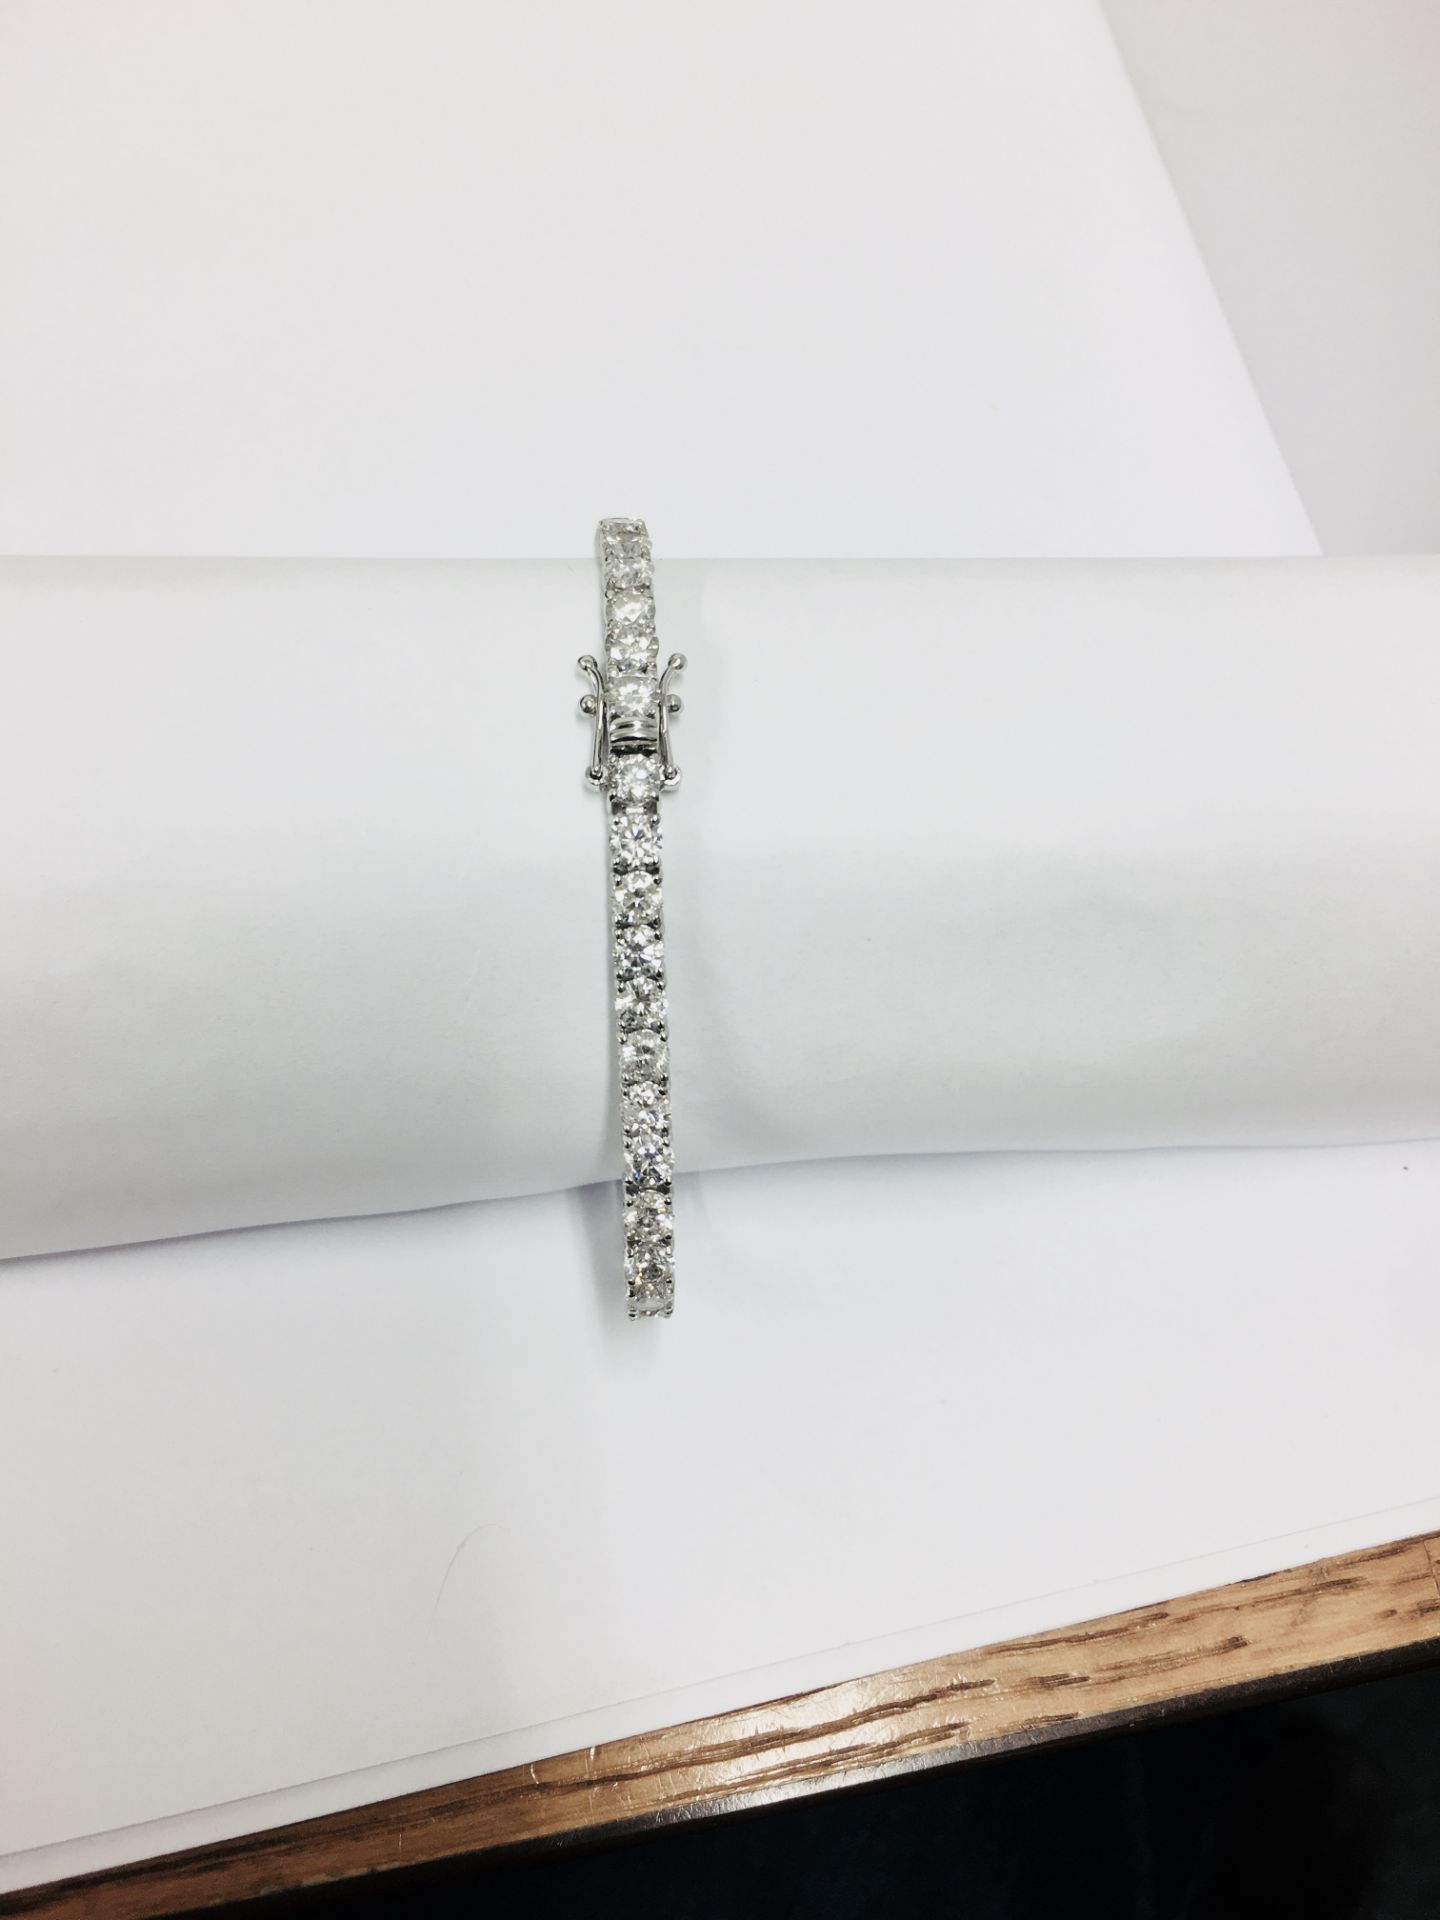 10.50ct Diamond tennis bracelet set with brilliant cut diamonds of I colour, si2 clarity. All set in - Image 6 of 7